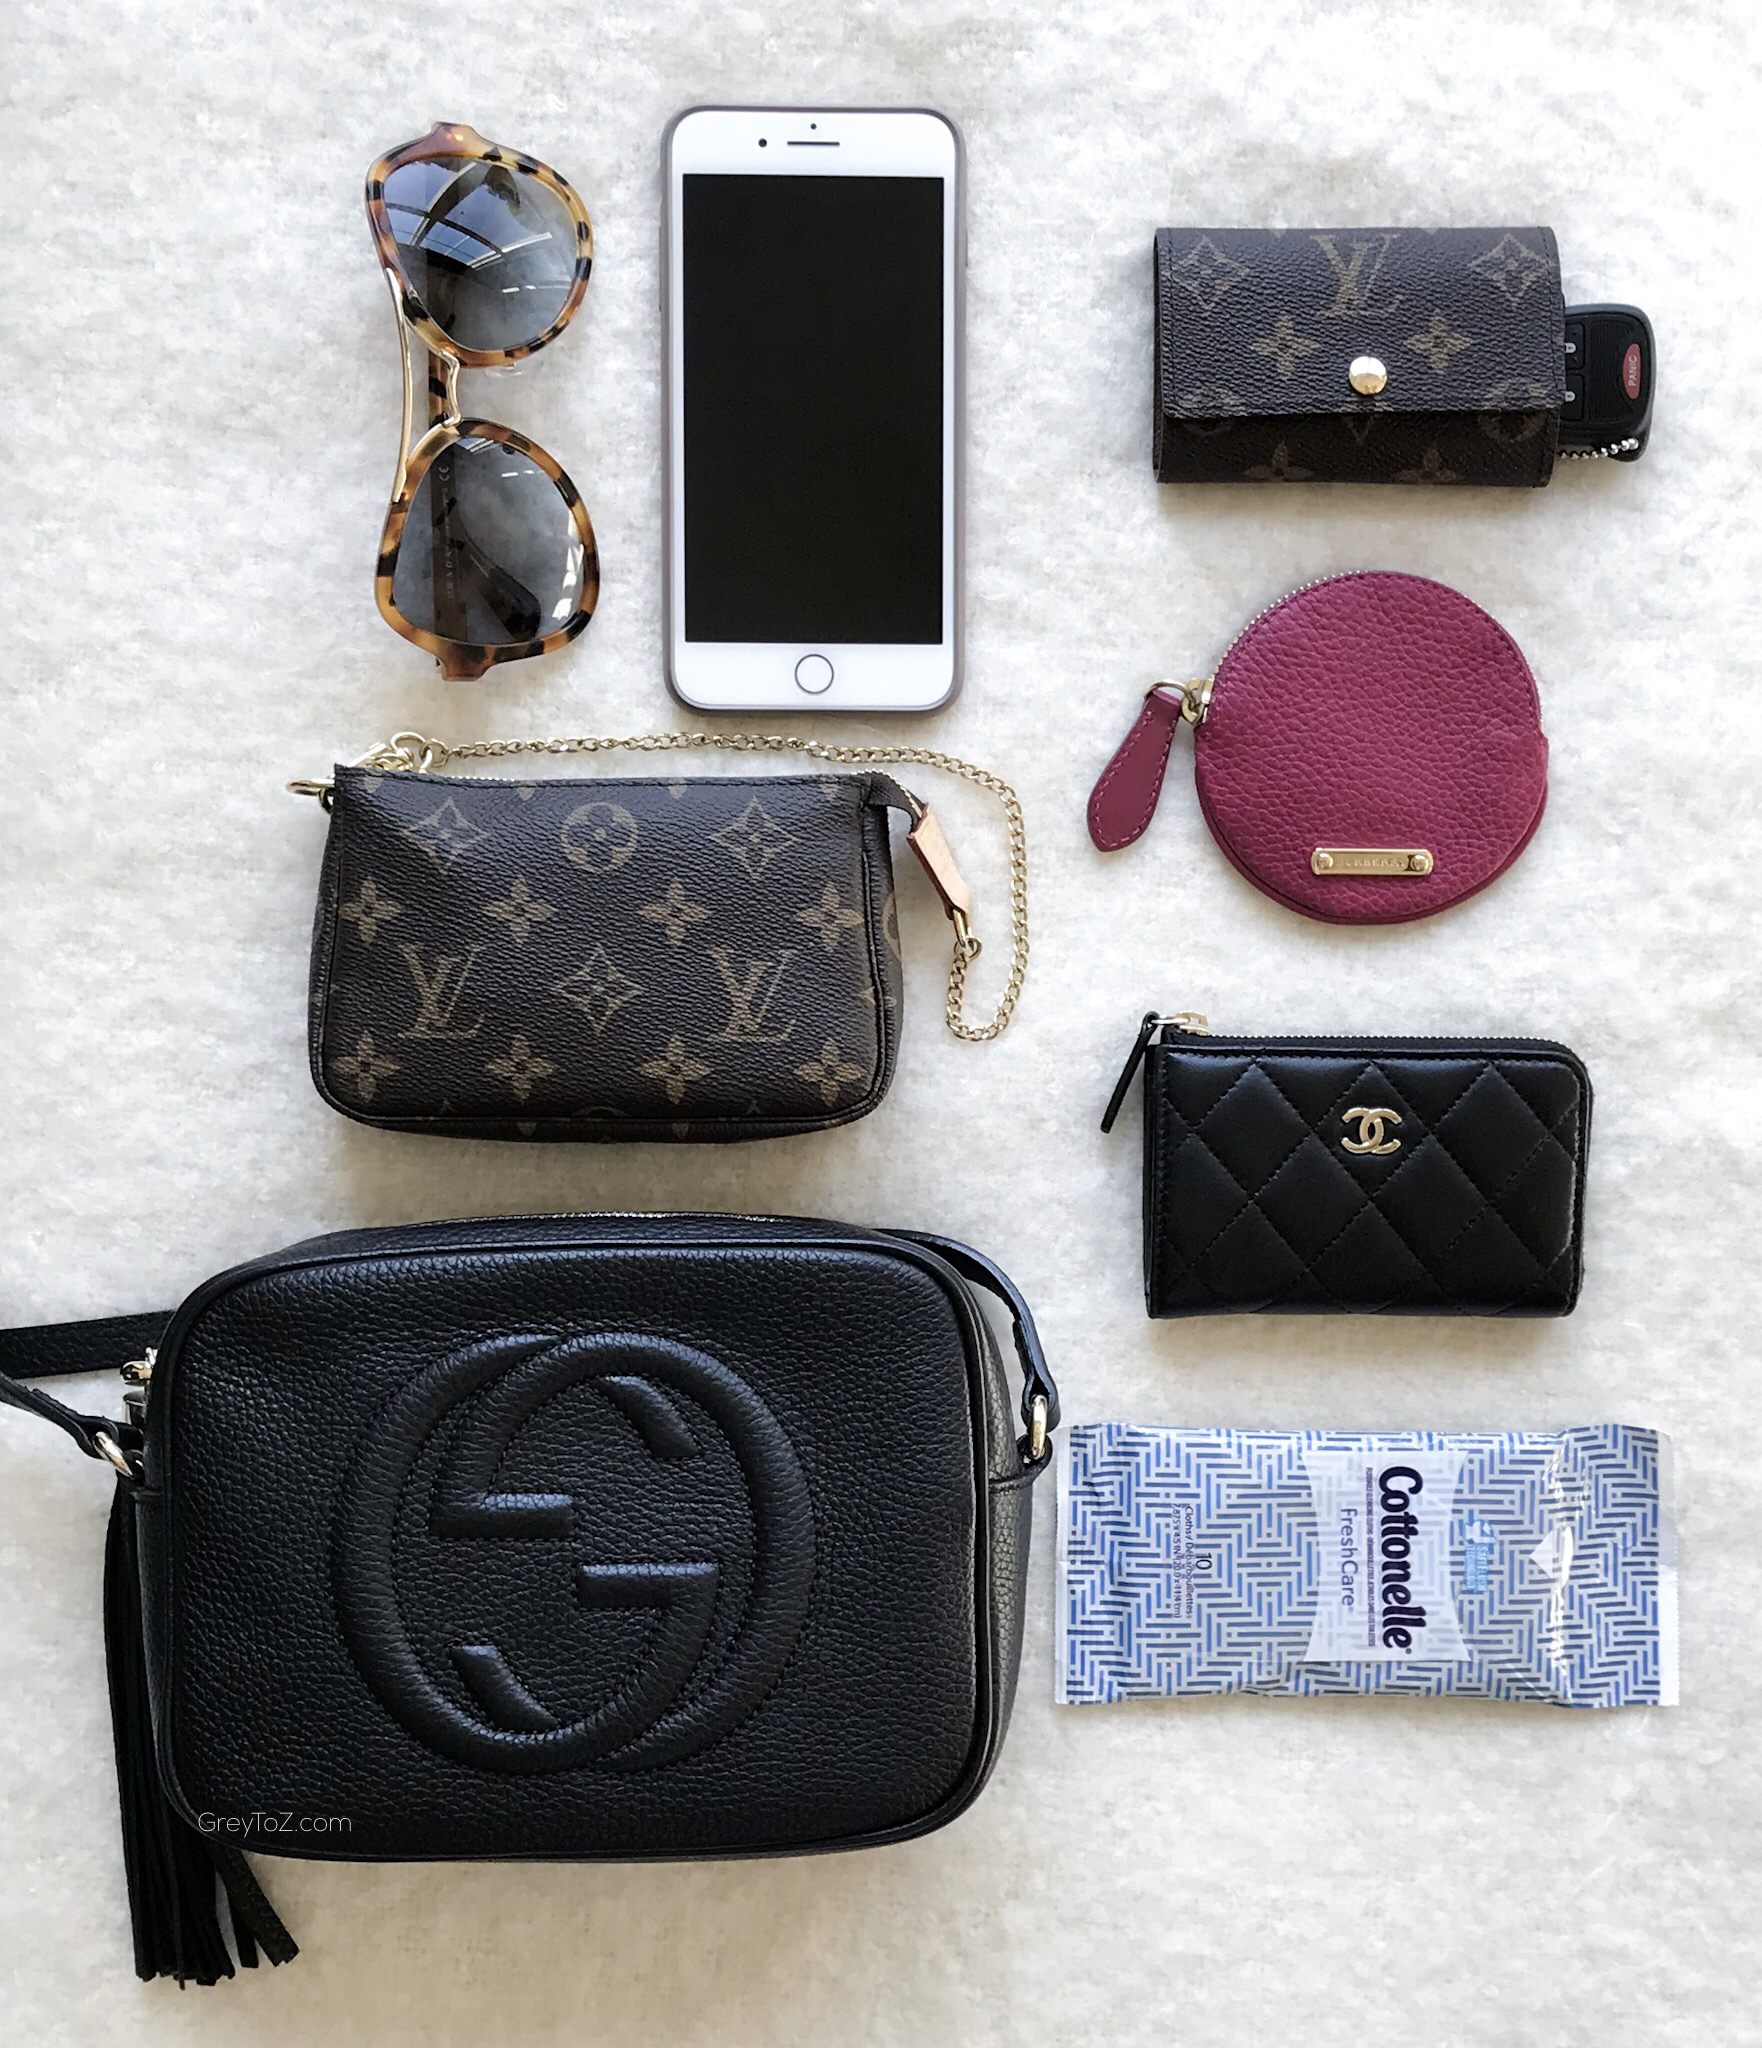 WHAT'S IN MY BAG, GUCCI SOHO DISCO